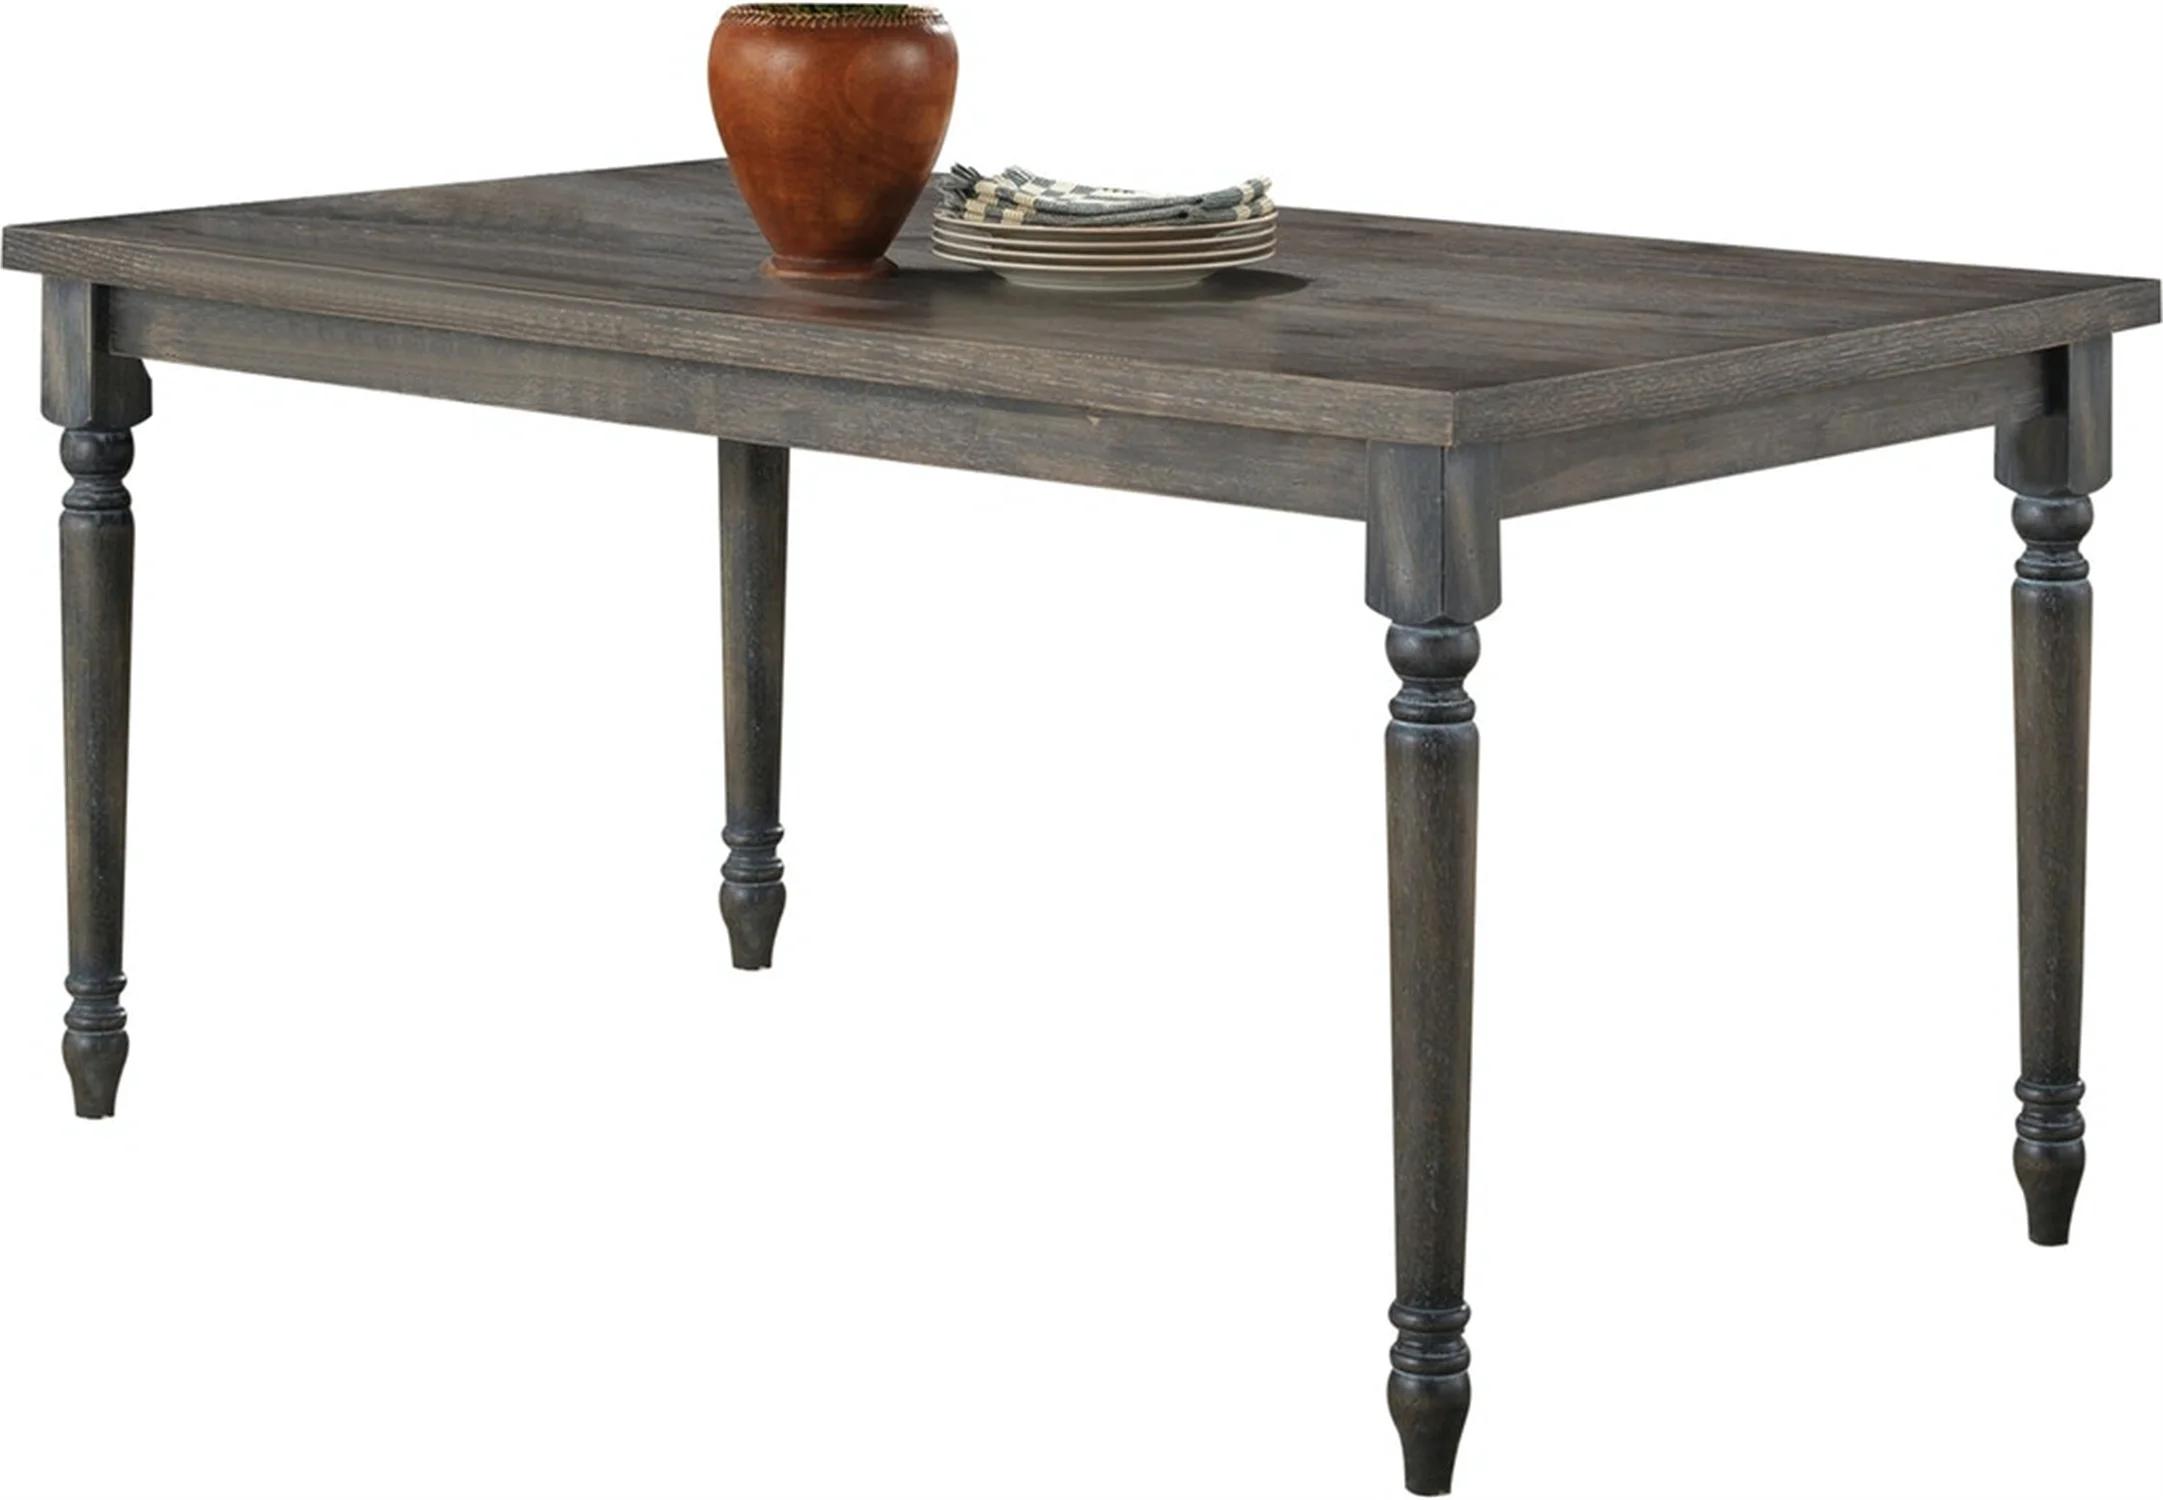 Contemporary, Rustic Dining Table Wallace 71435 in Gray 